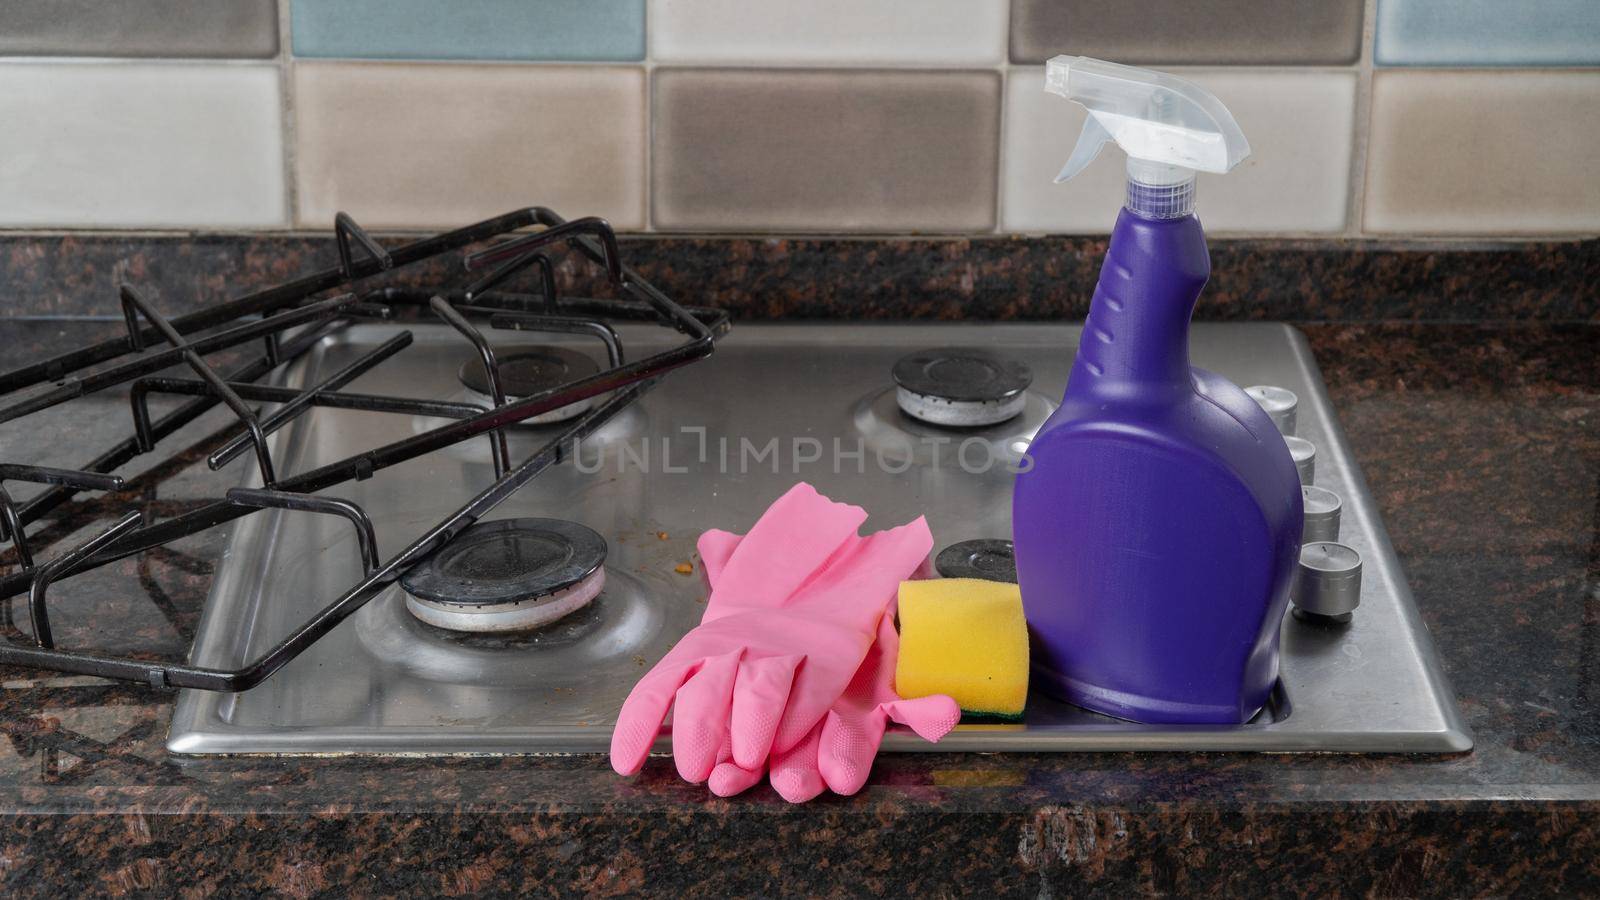 Rubber glove wash kit, sponge, detergent on a gas stove by voktybre